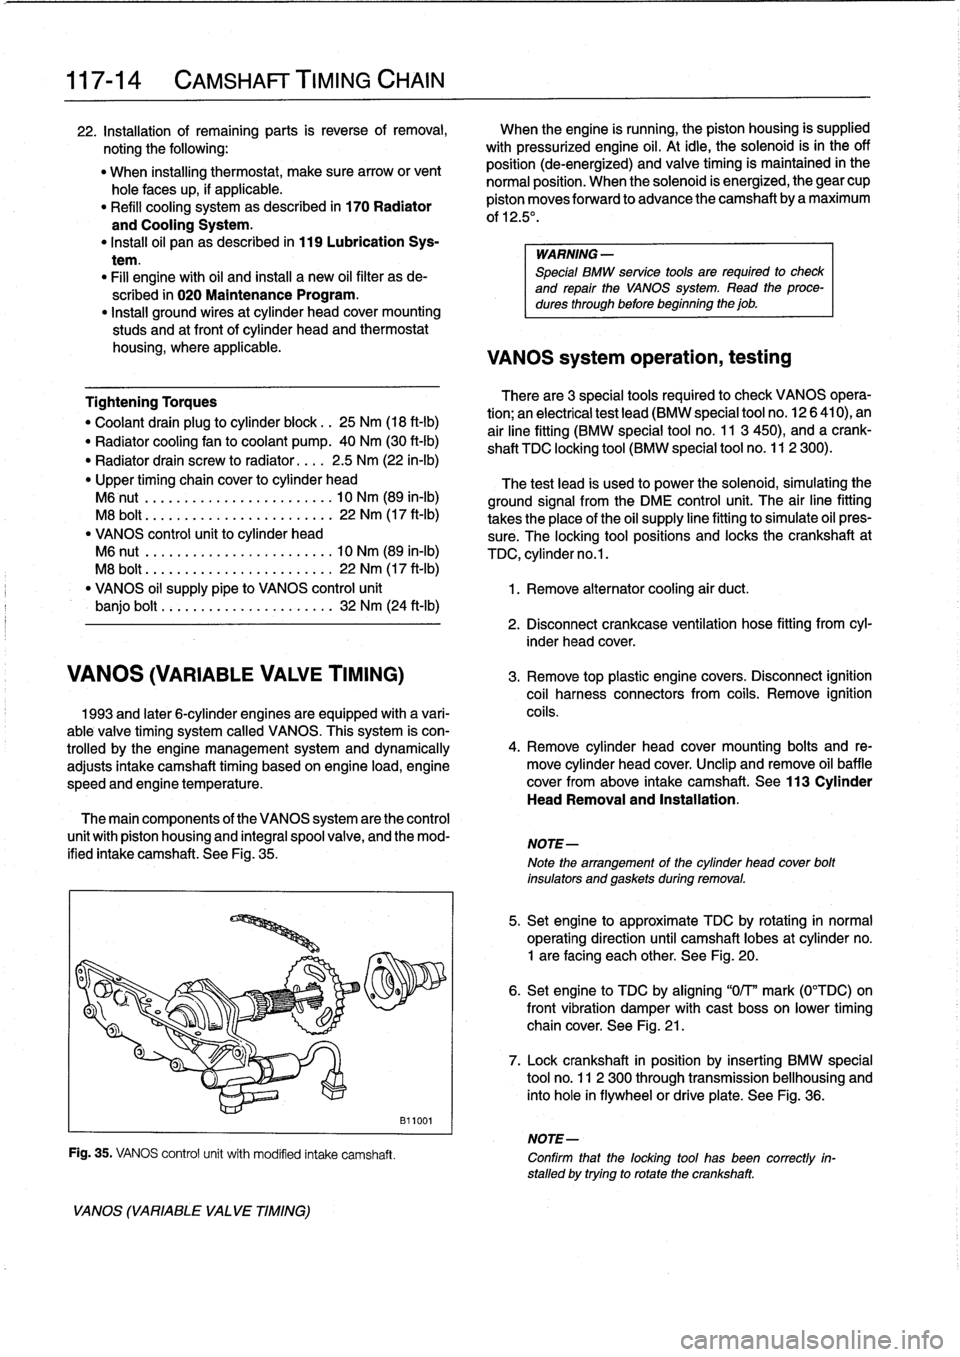 BMW 323i 1995 E36 Workshop Manual 
117-
1
4

	

CAMSHAFT
TIMING
CHAIN

22
.
Installation
of
remaining
parts
is
reverse
of
removal,

	

When
theengine
is
running,
the
piston
housing
is
supplied

noting
the
following
:

	

with
pressuri